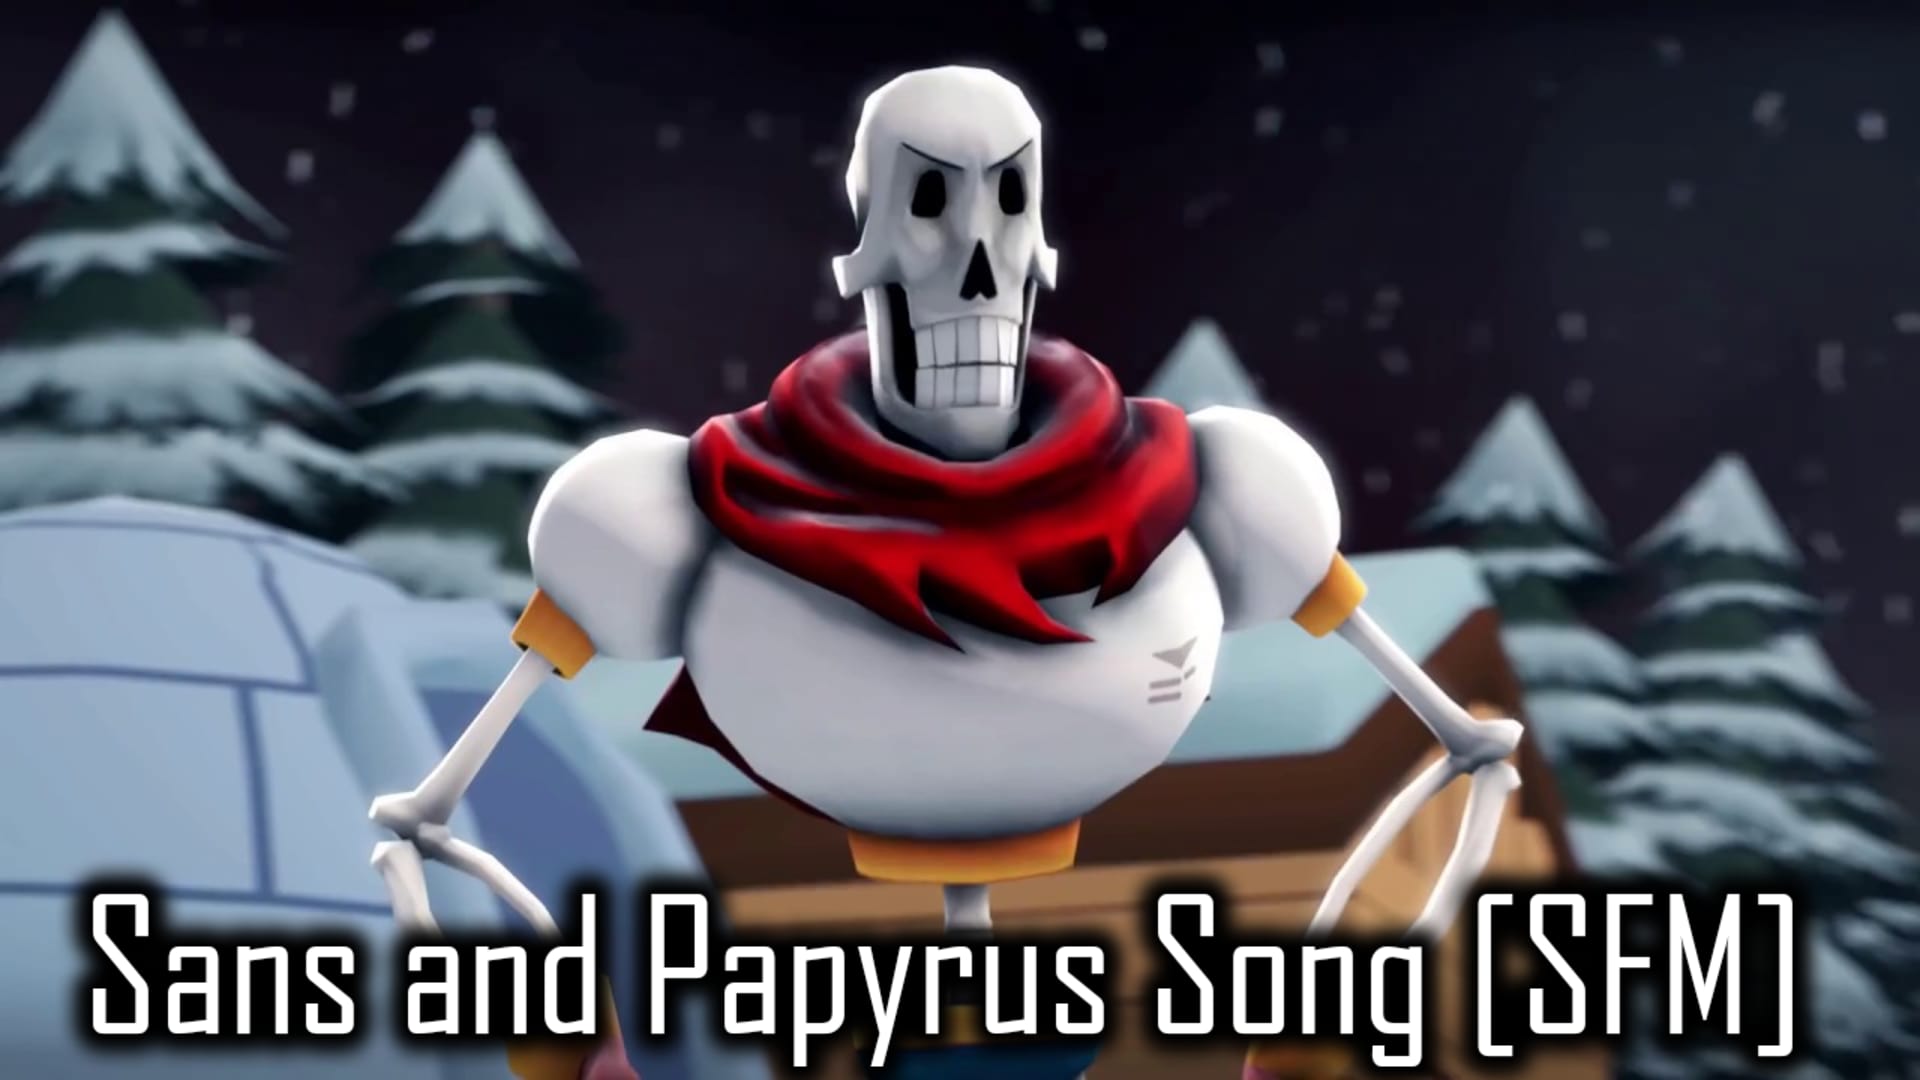 Another bad. Sans and Papyrus Song. Песня папируса. To the Bone Санс. Sans and Papyrus Song JT.